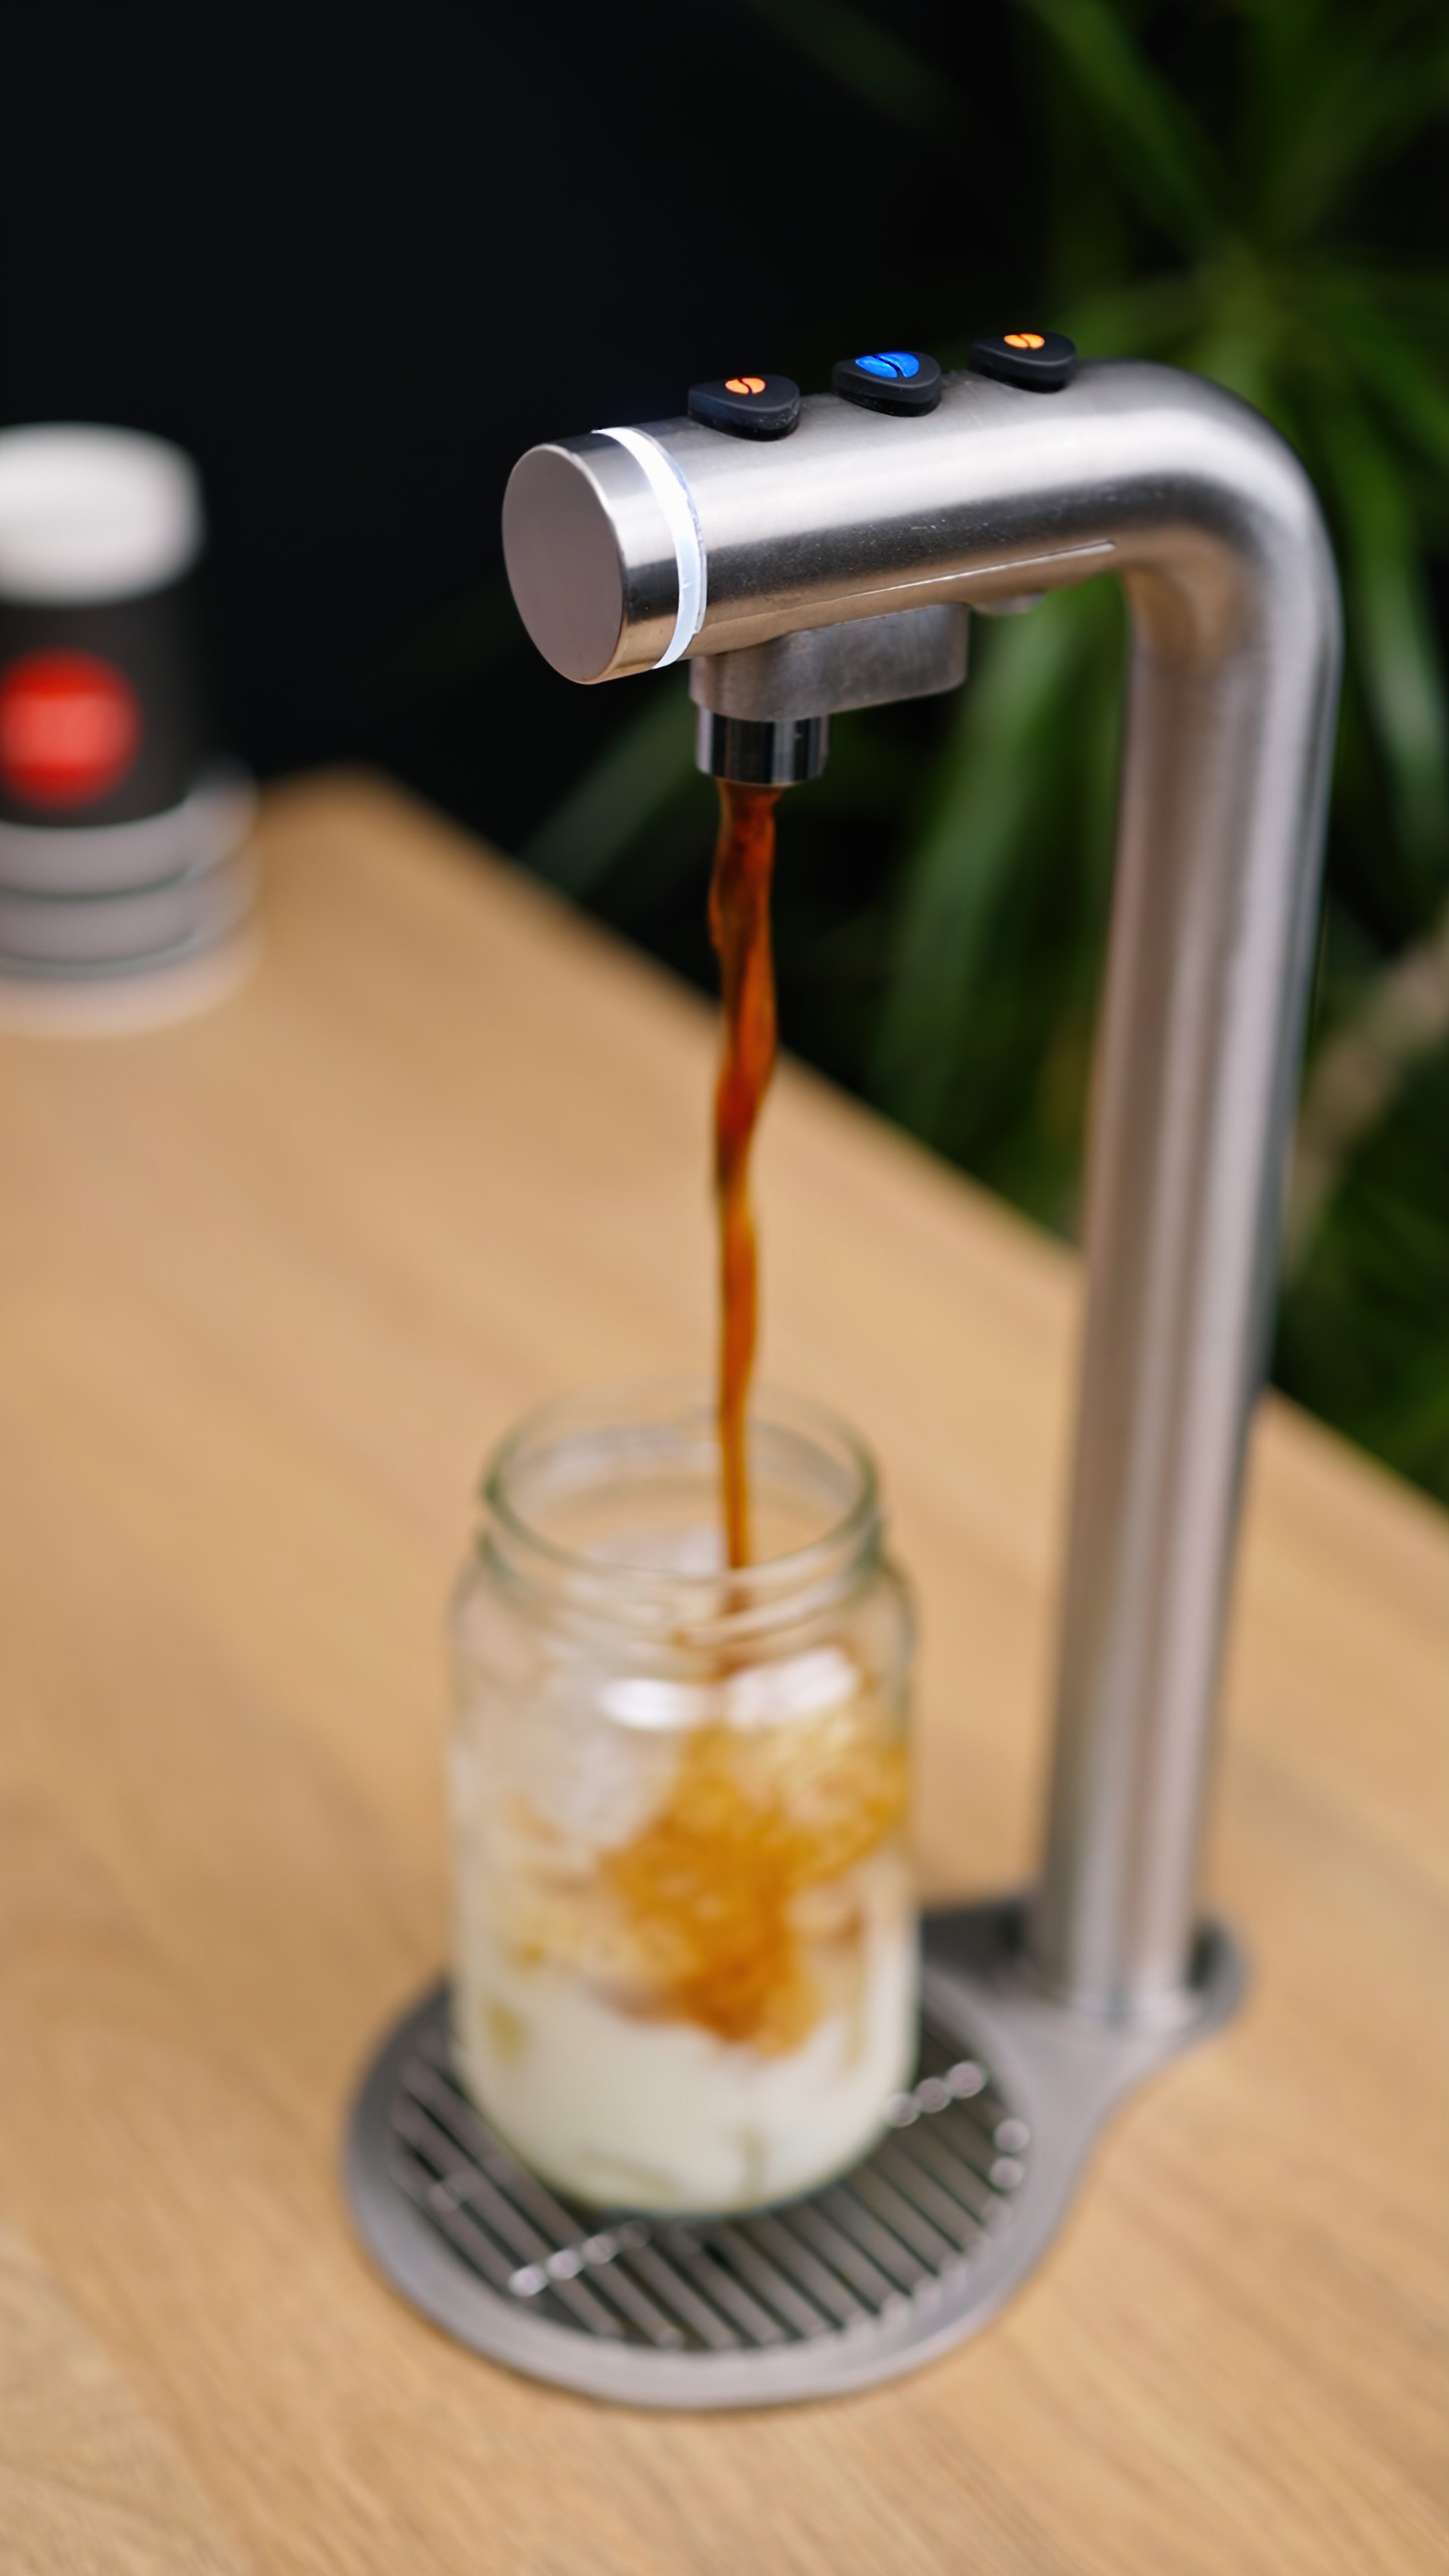 Introducing the Marco POUR'D System: Cold Coffee Dispense.